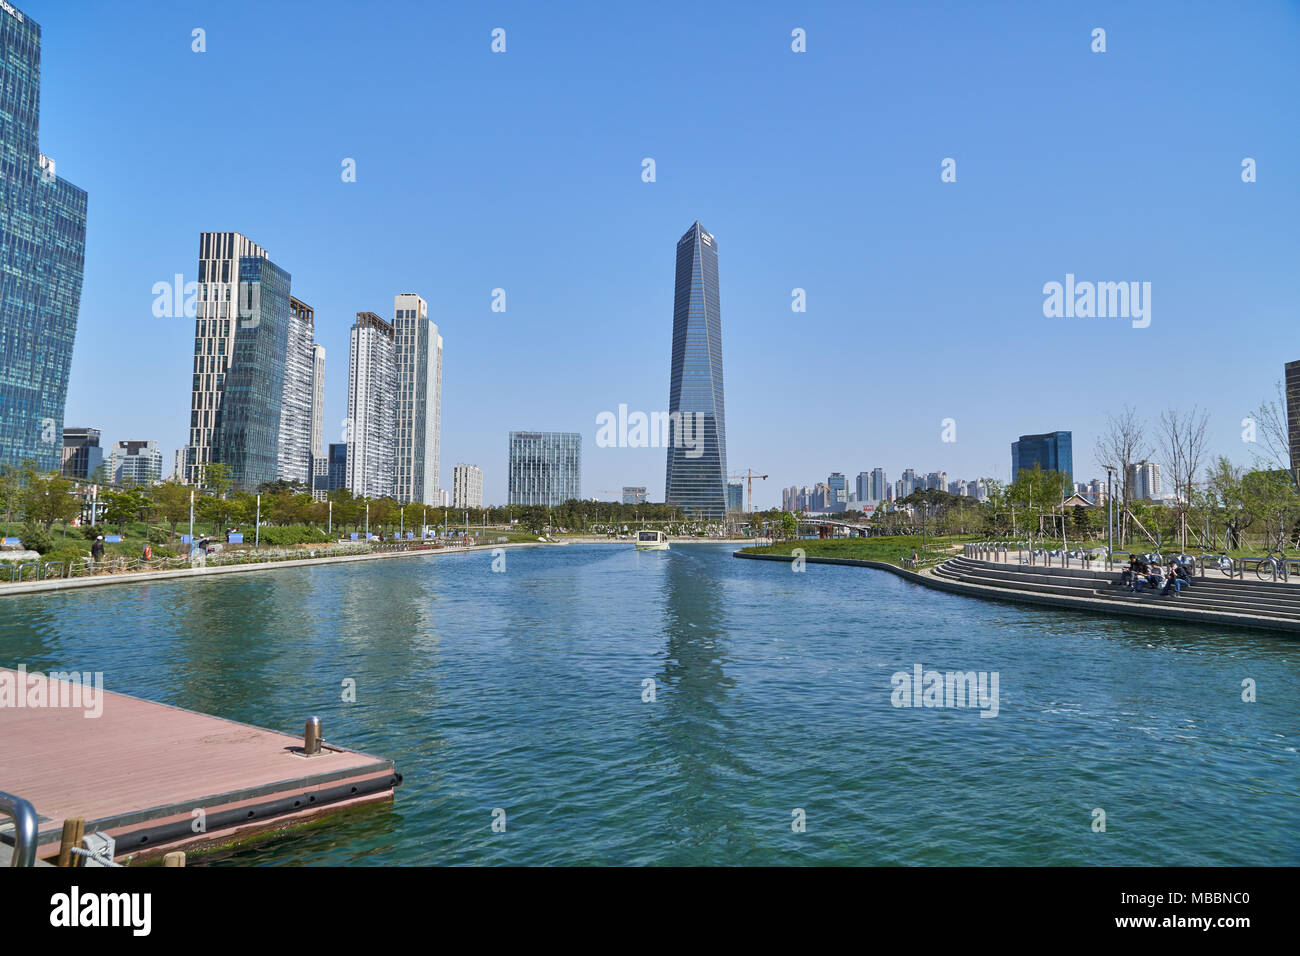 Incheon, Korea - April 27, 2017: Songdo International Business District (Songdo IBD) with Songdo Central Park. The city is a new smart city and connec Stock Photo